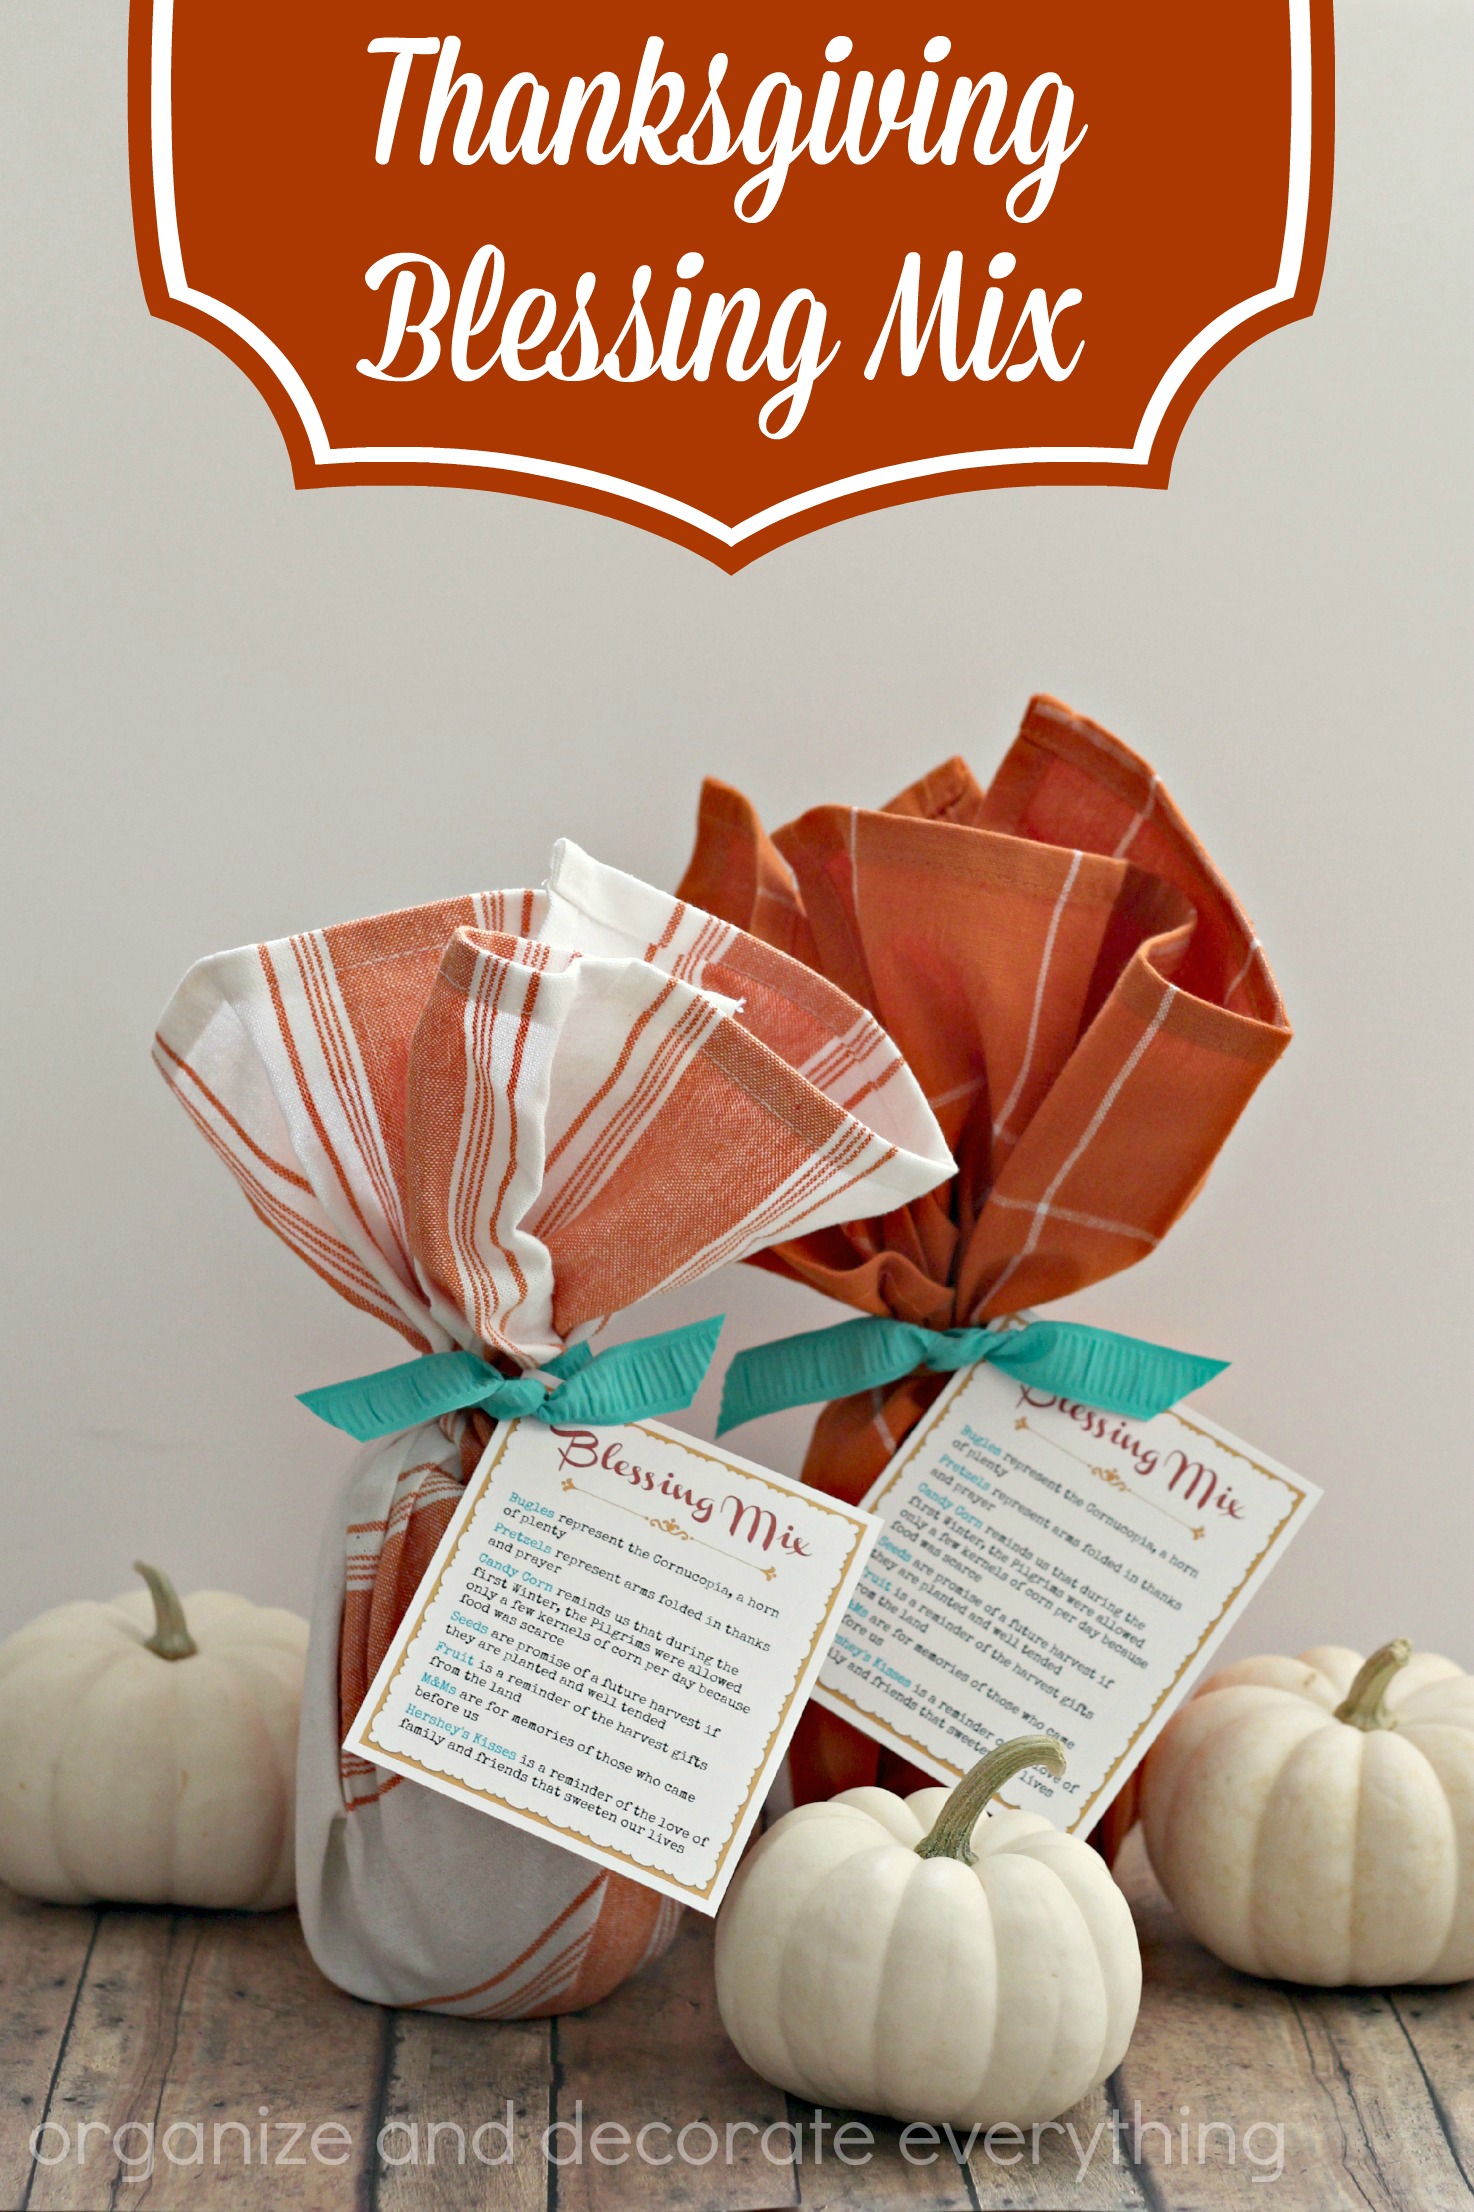 Thanksgiving-Blessing-Mix-Organize-and-Decorate-Everything